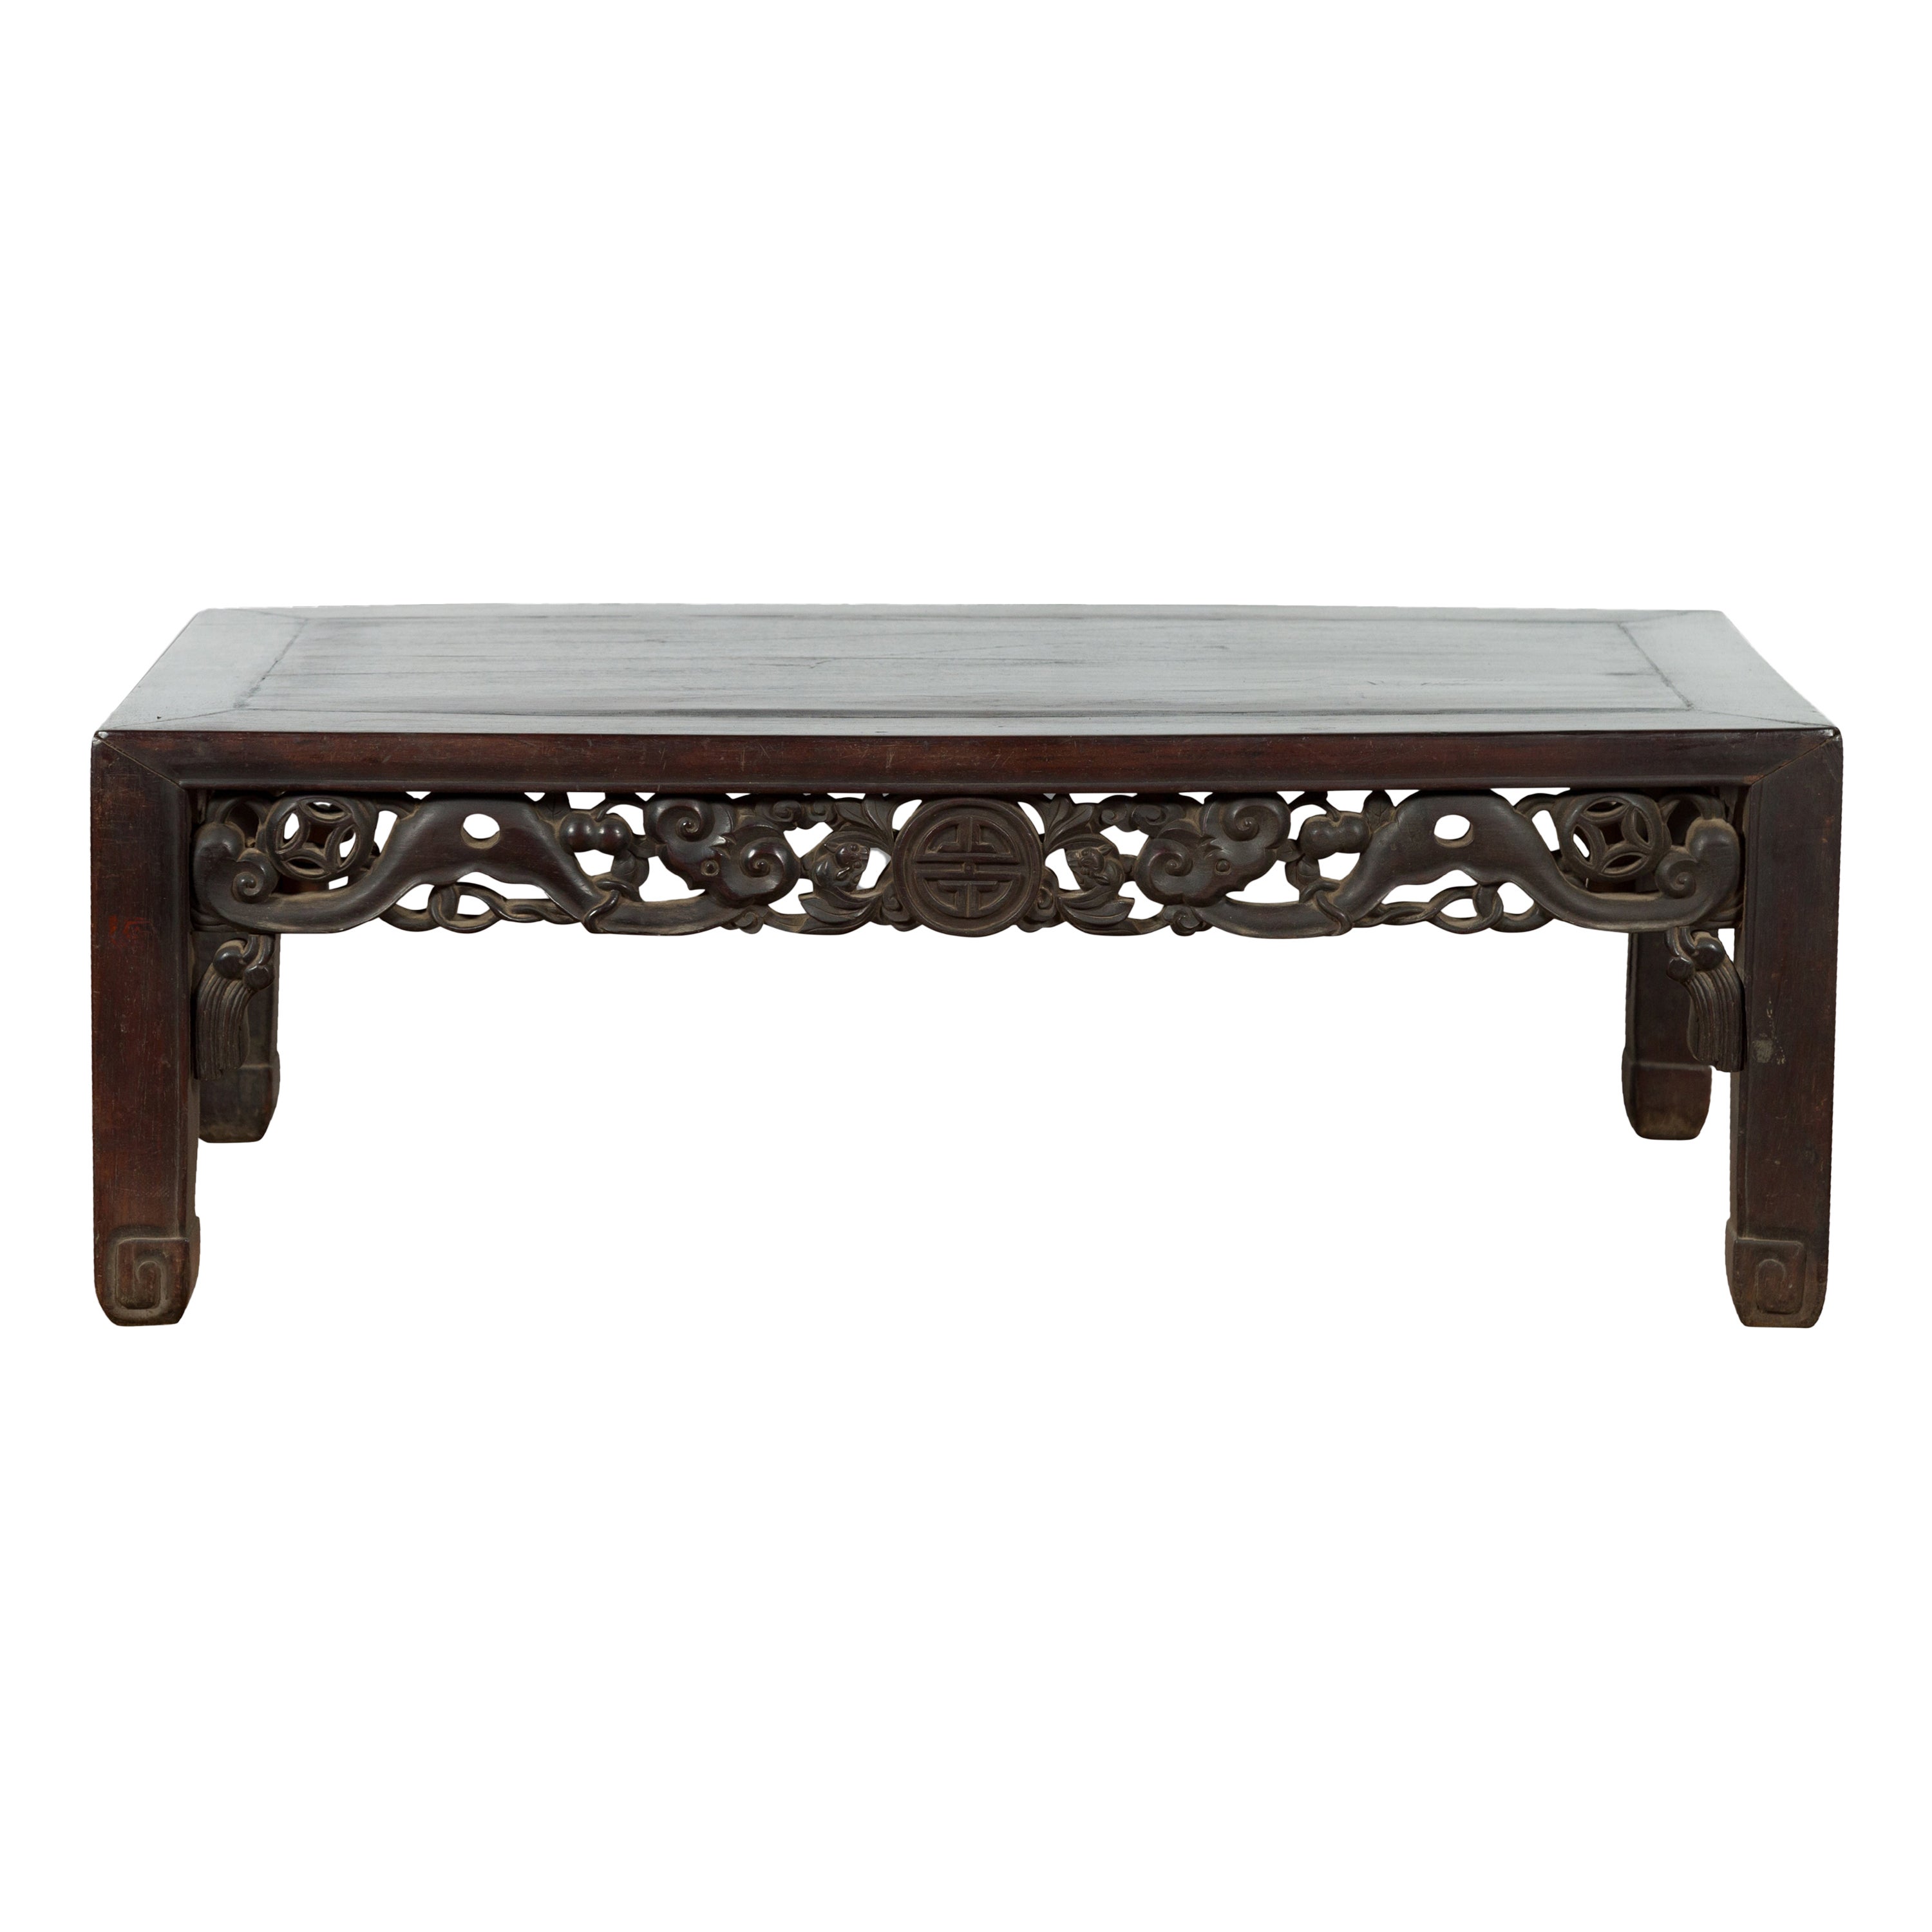 Chinese Qing Dynasty 19th Century Coffee Table with Carved Apron and Dark Patina For Sale